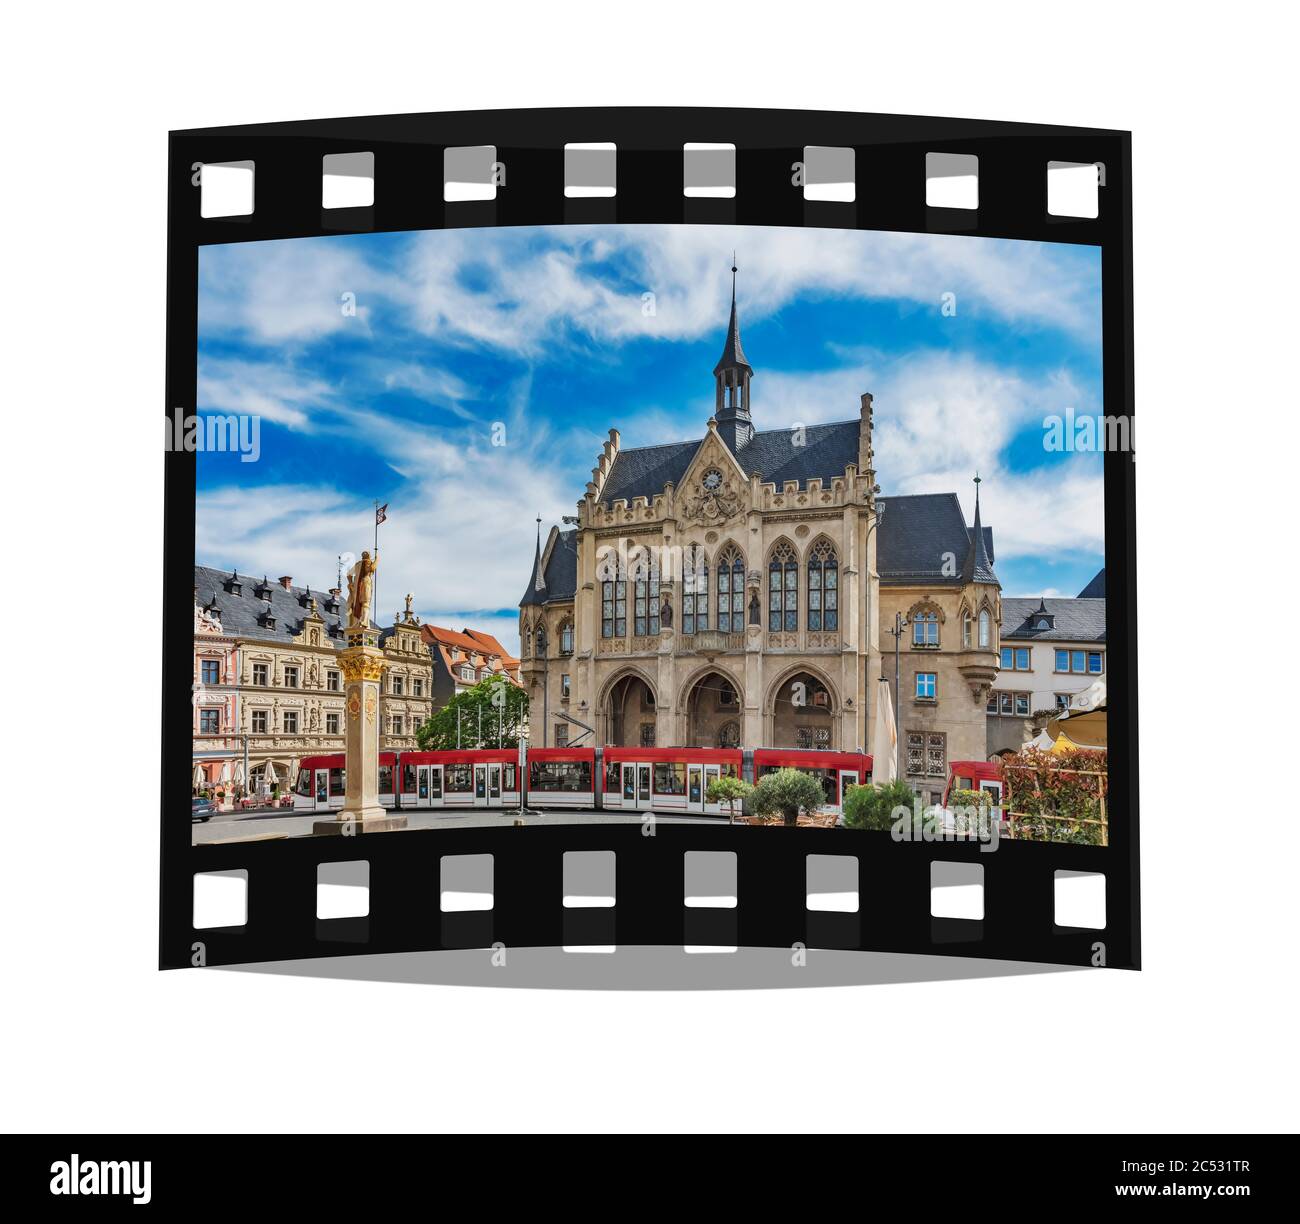 The town hall was built in 1870 in Gothic Revival style. It is located at the fish market in Erfurt, Capital of Thuringia, Germany, Europe Stock Photo